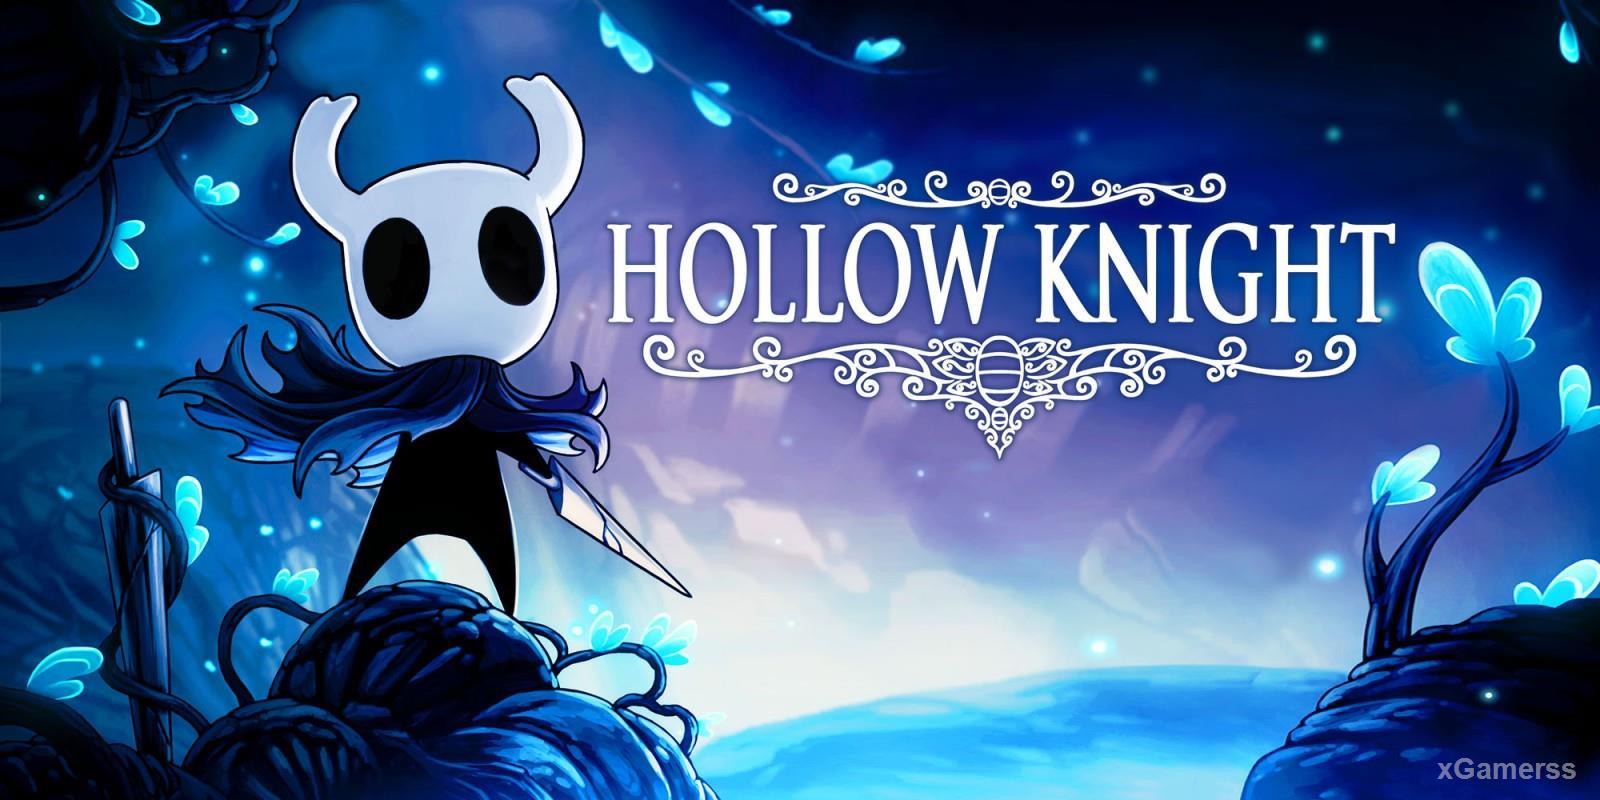 Top 13 - Games like Hollow Knight